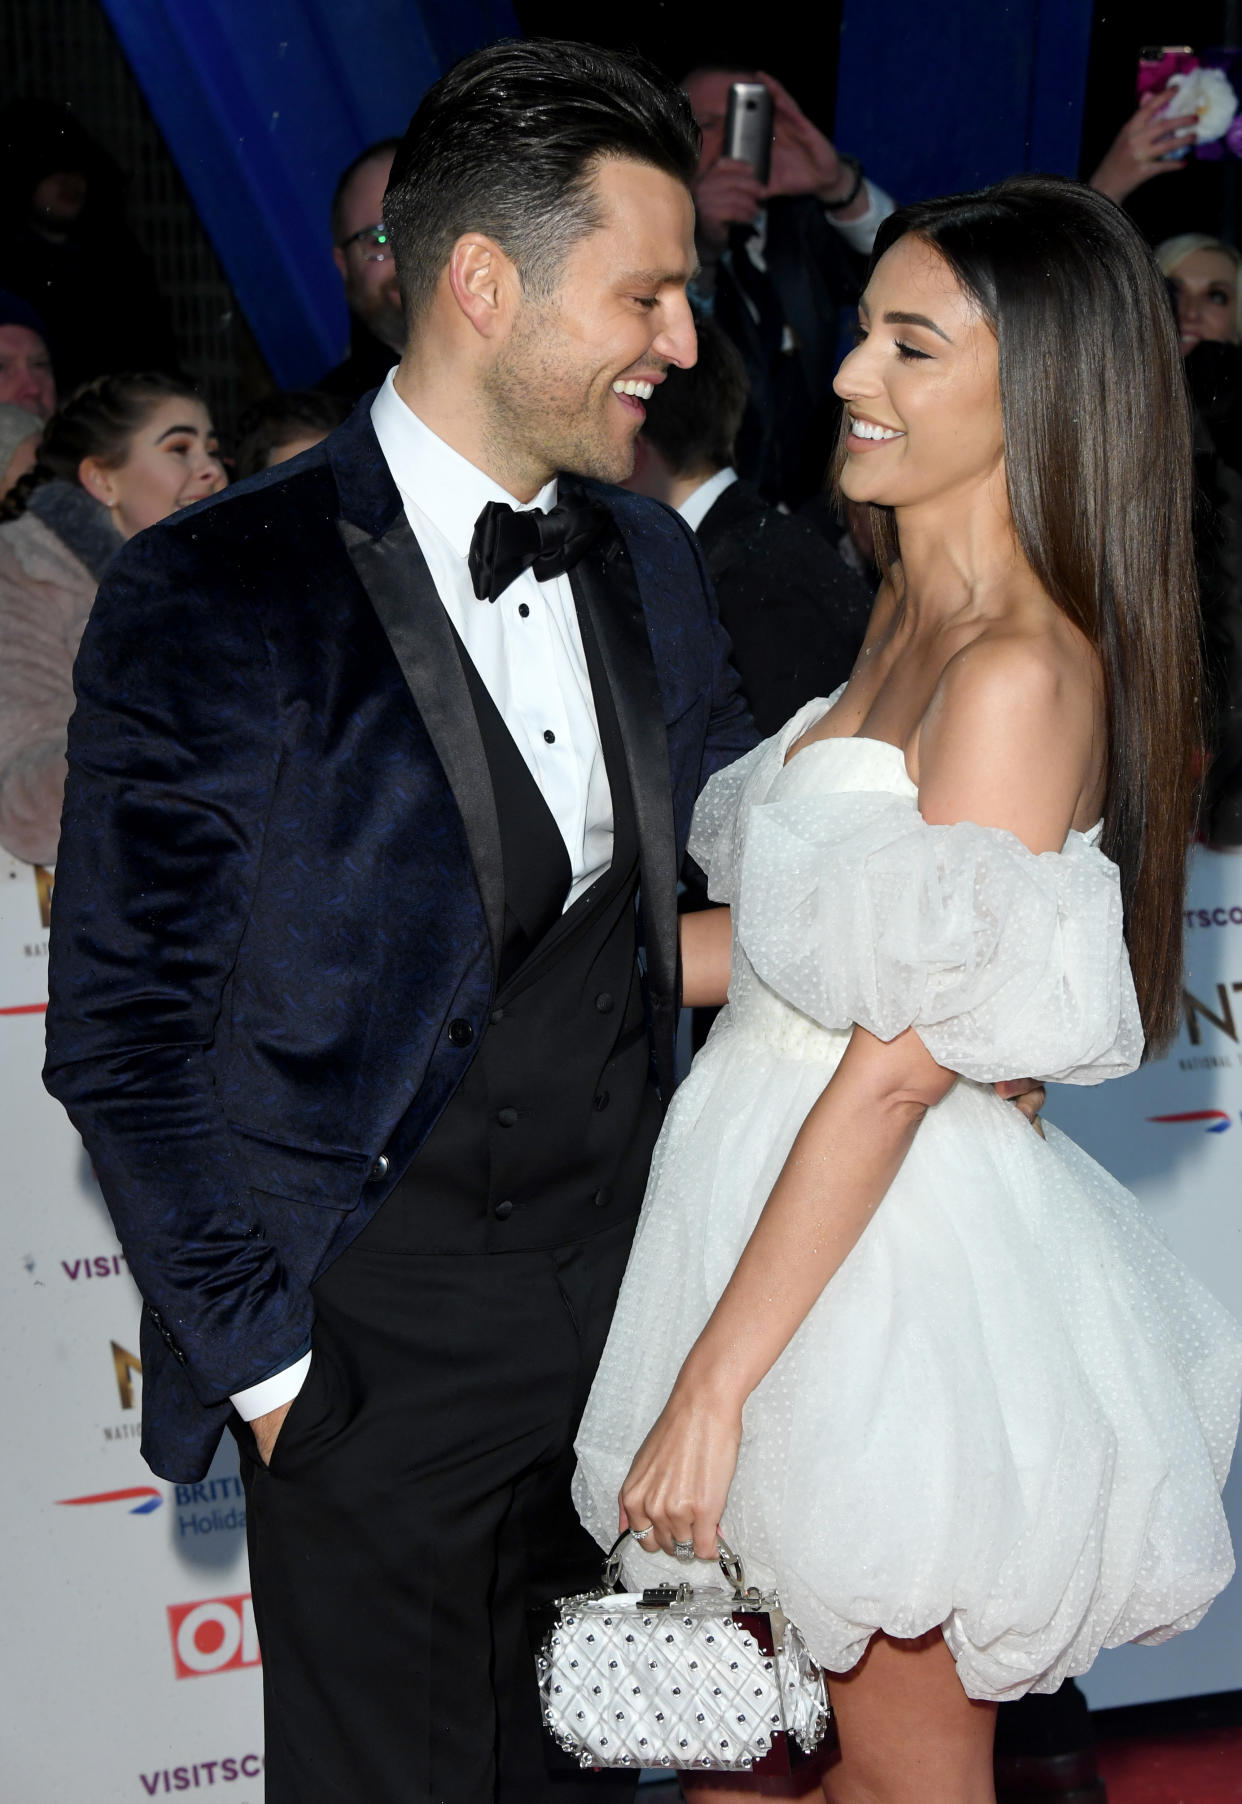 LONDON, ENGLAND - JANUARY 22:  Mark Wright and Michelle Keegan attends the National Television Awards held at the O2 Arena on January 22, 2019 in London, England. (Photo by Stuart C. Wilson/Getty Images)